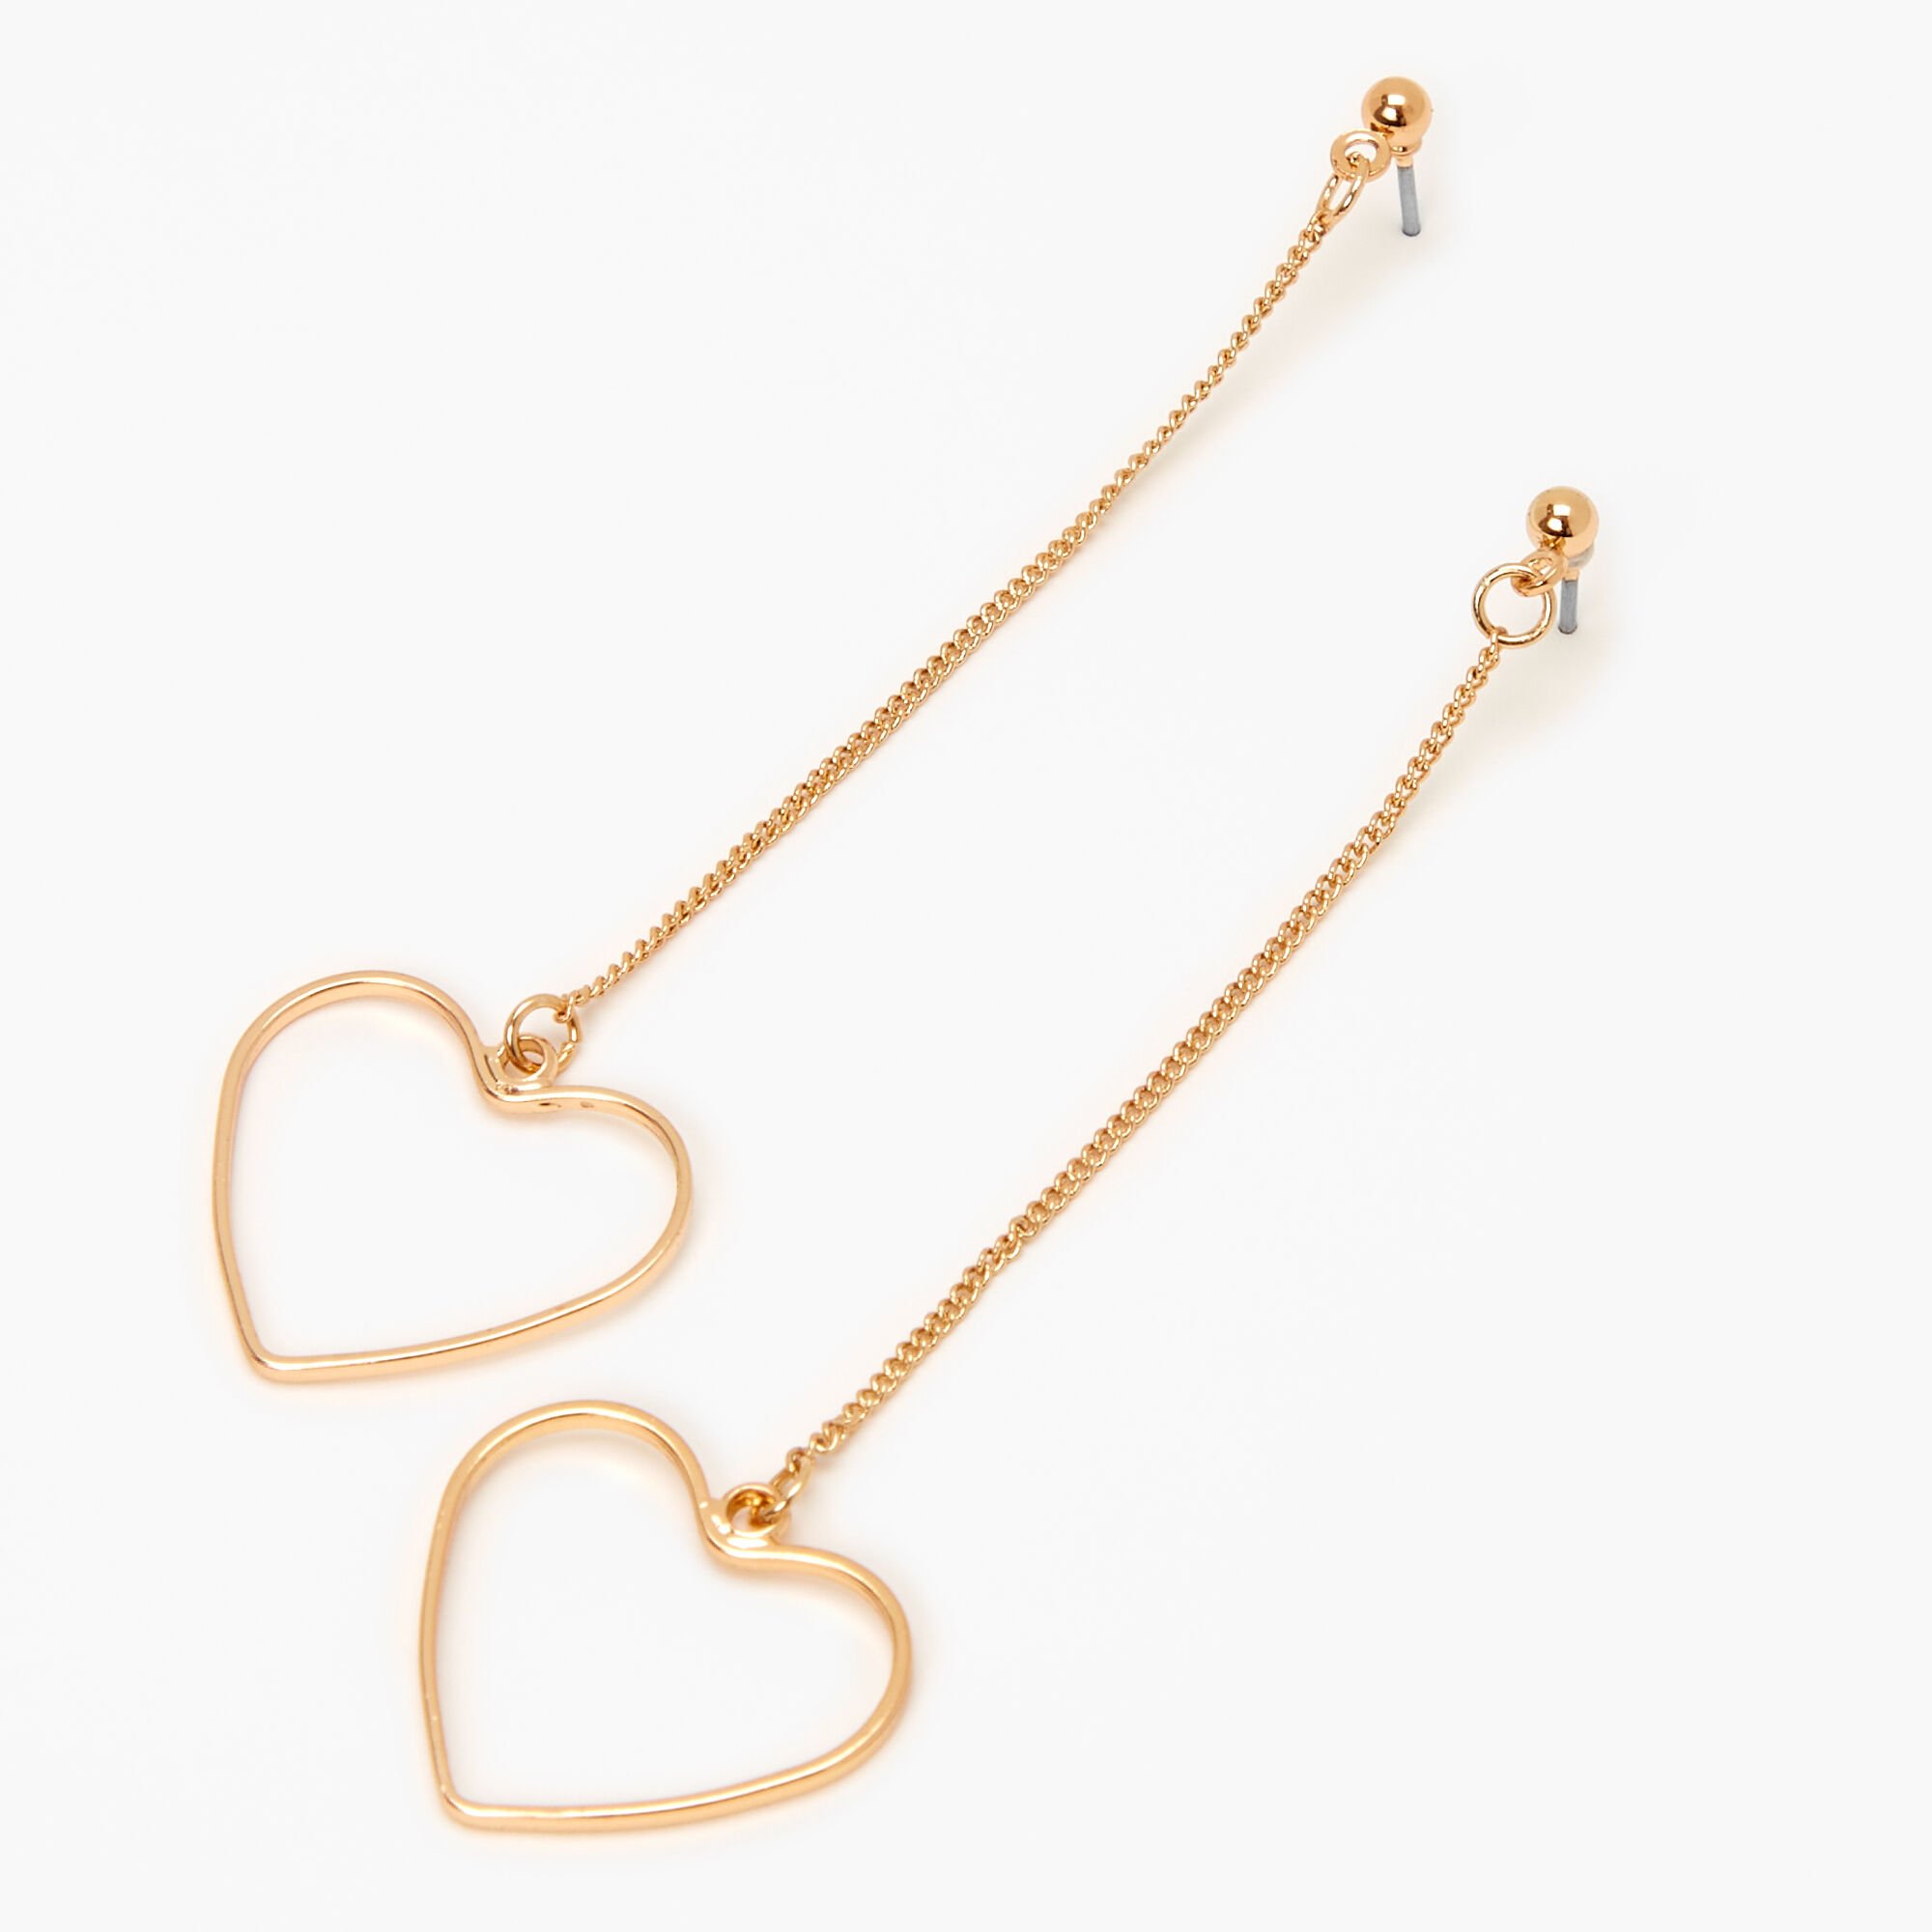 View Claires Tone Open Heart Linear 3 Drop Earrings Gold information